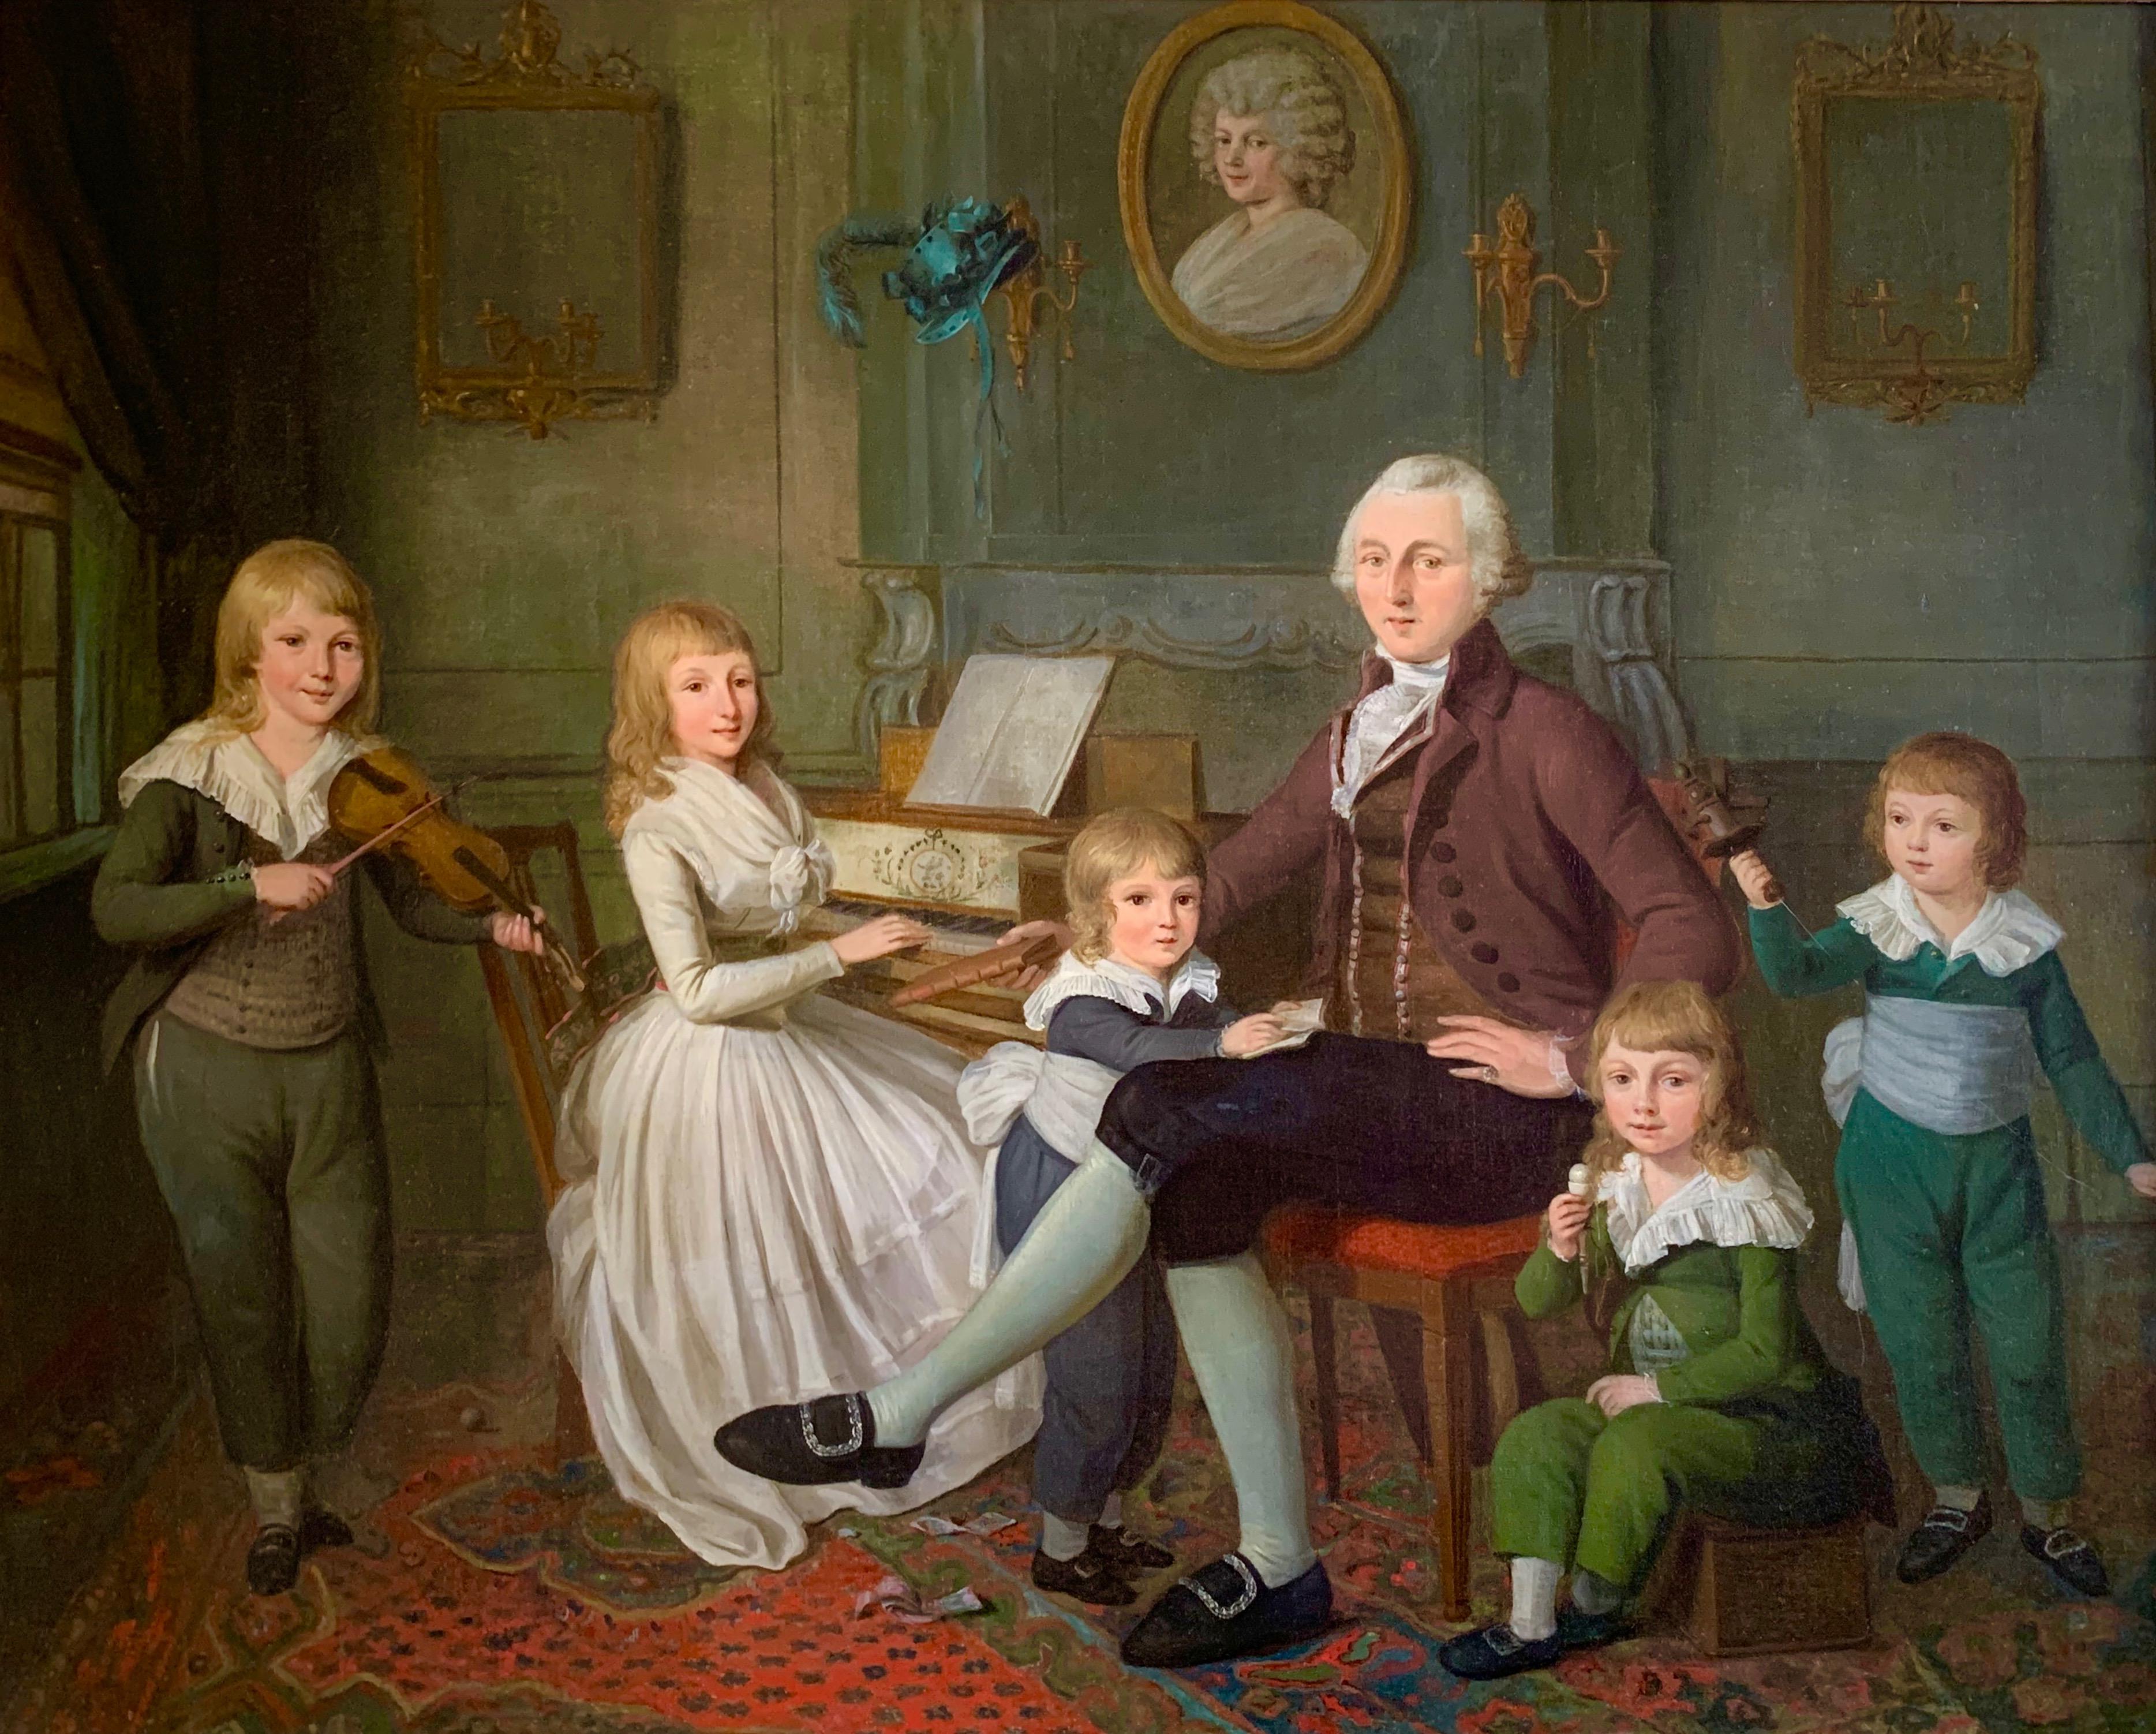 Unknown Interior Painting - 18th Century English Oil Painting of a Family and Children ' The Music Room"